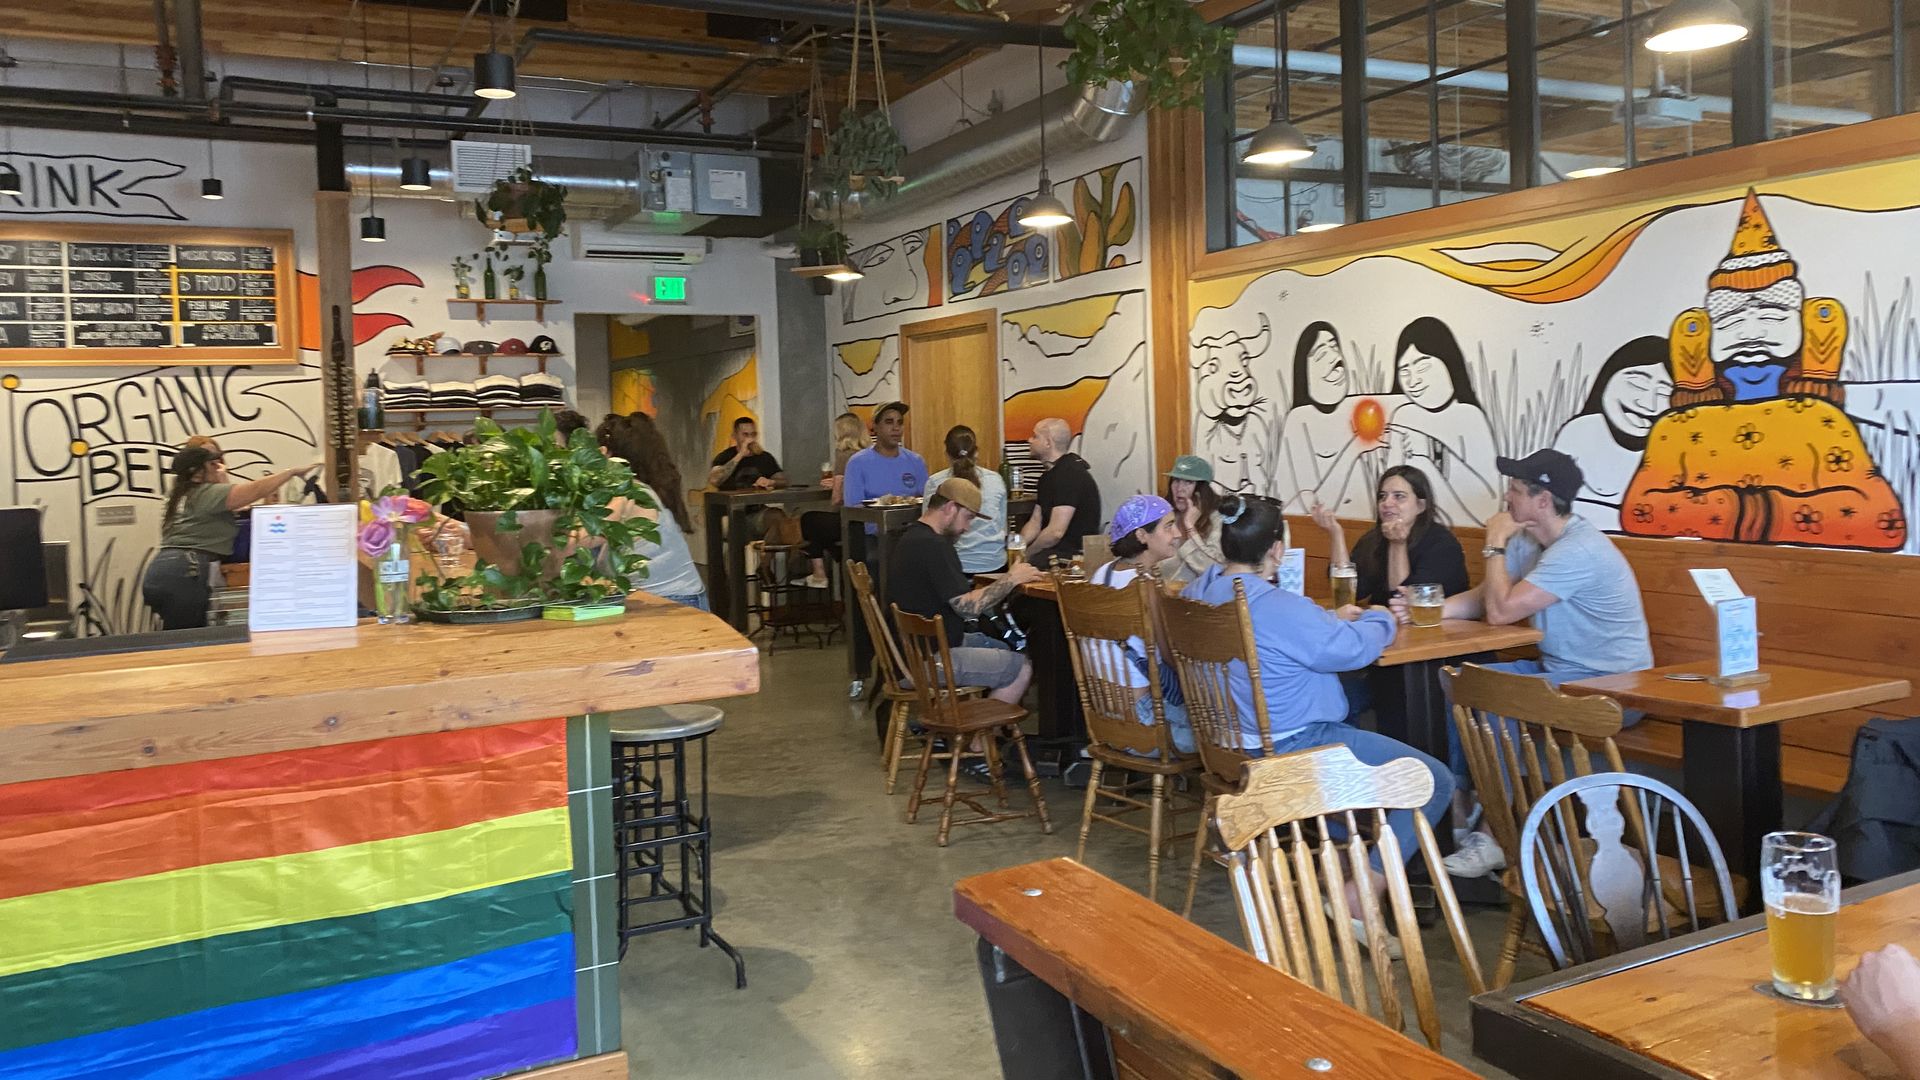 A view of the interior of a tap room with murals on the walls and people at small tables, and a pride flag at the end of the bar.